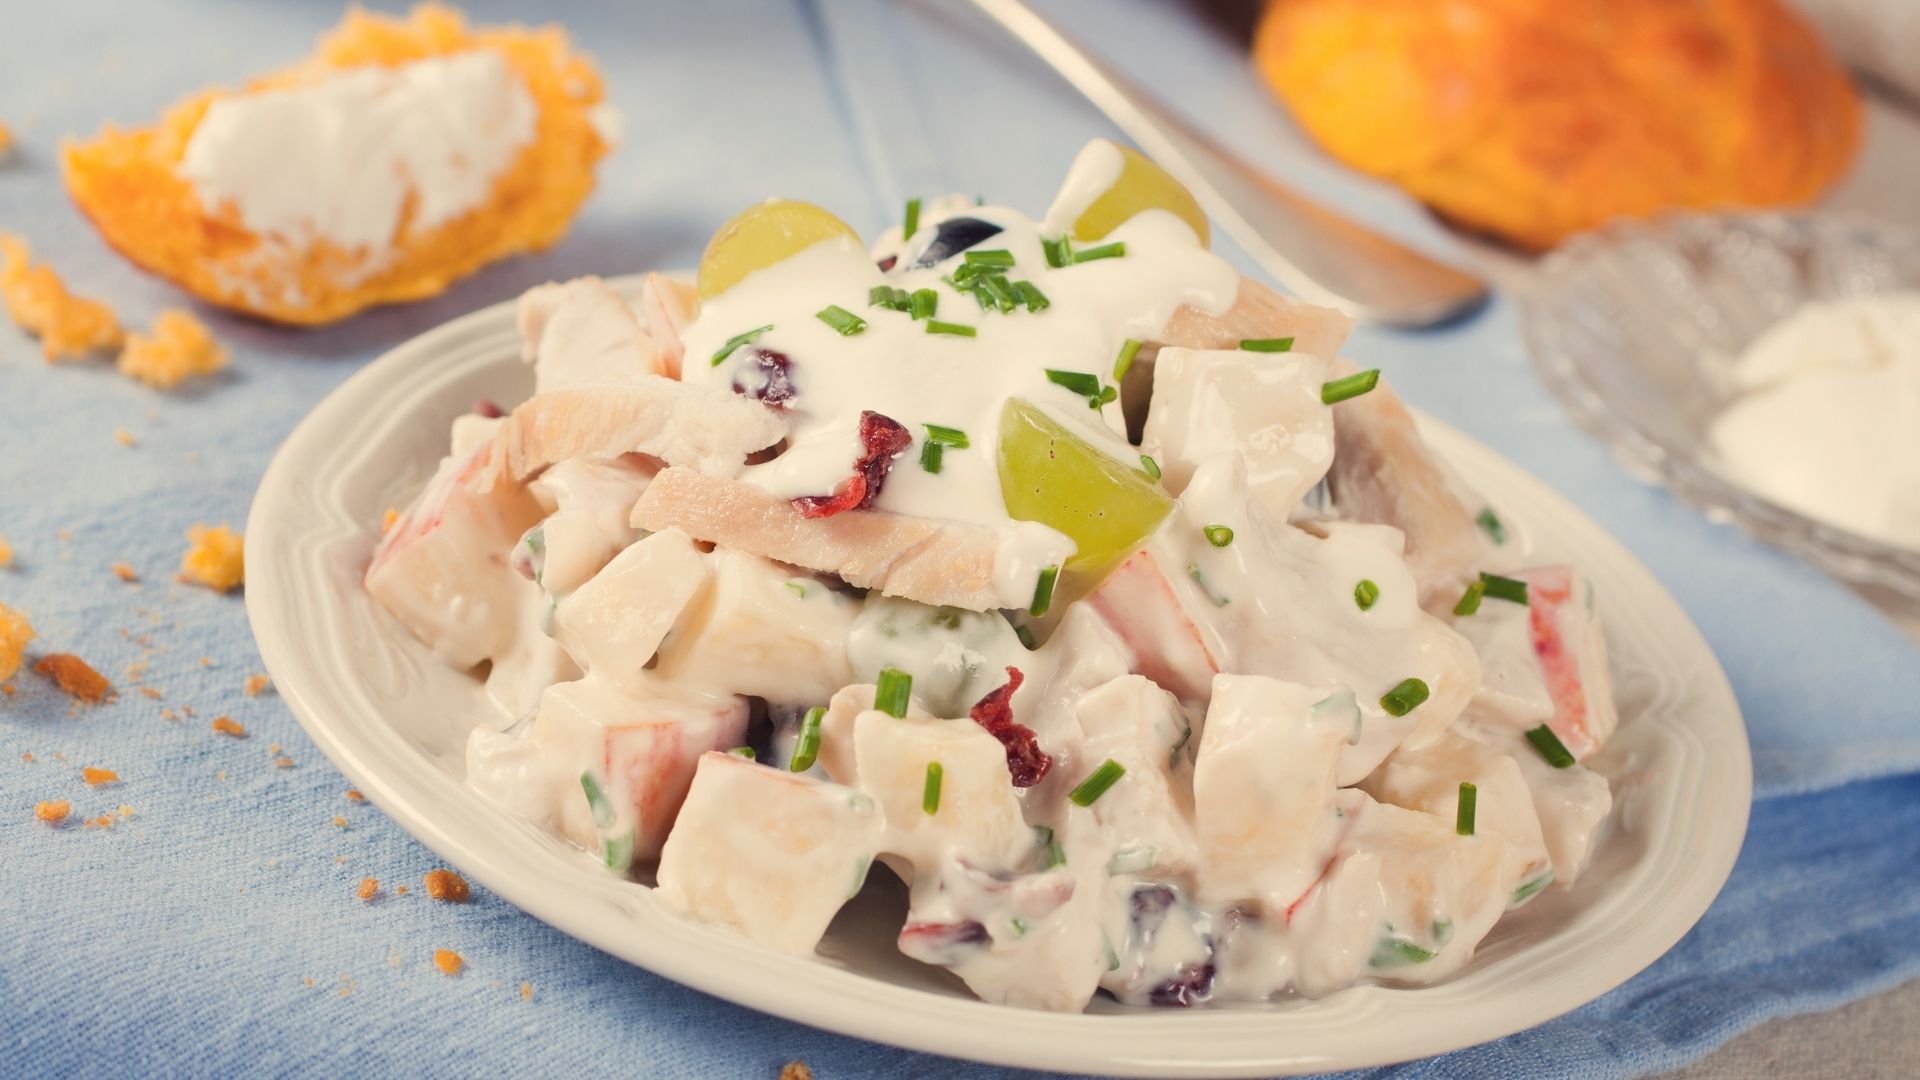 What is in chicken salad?